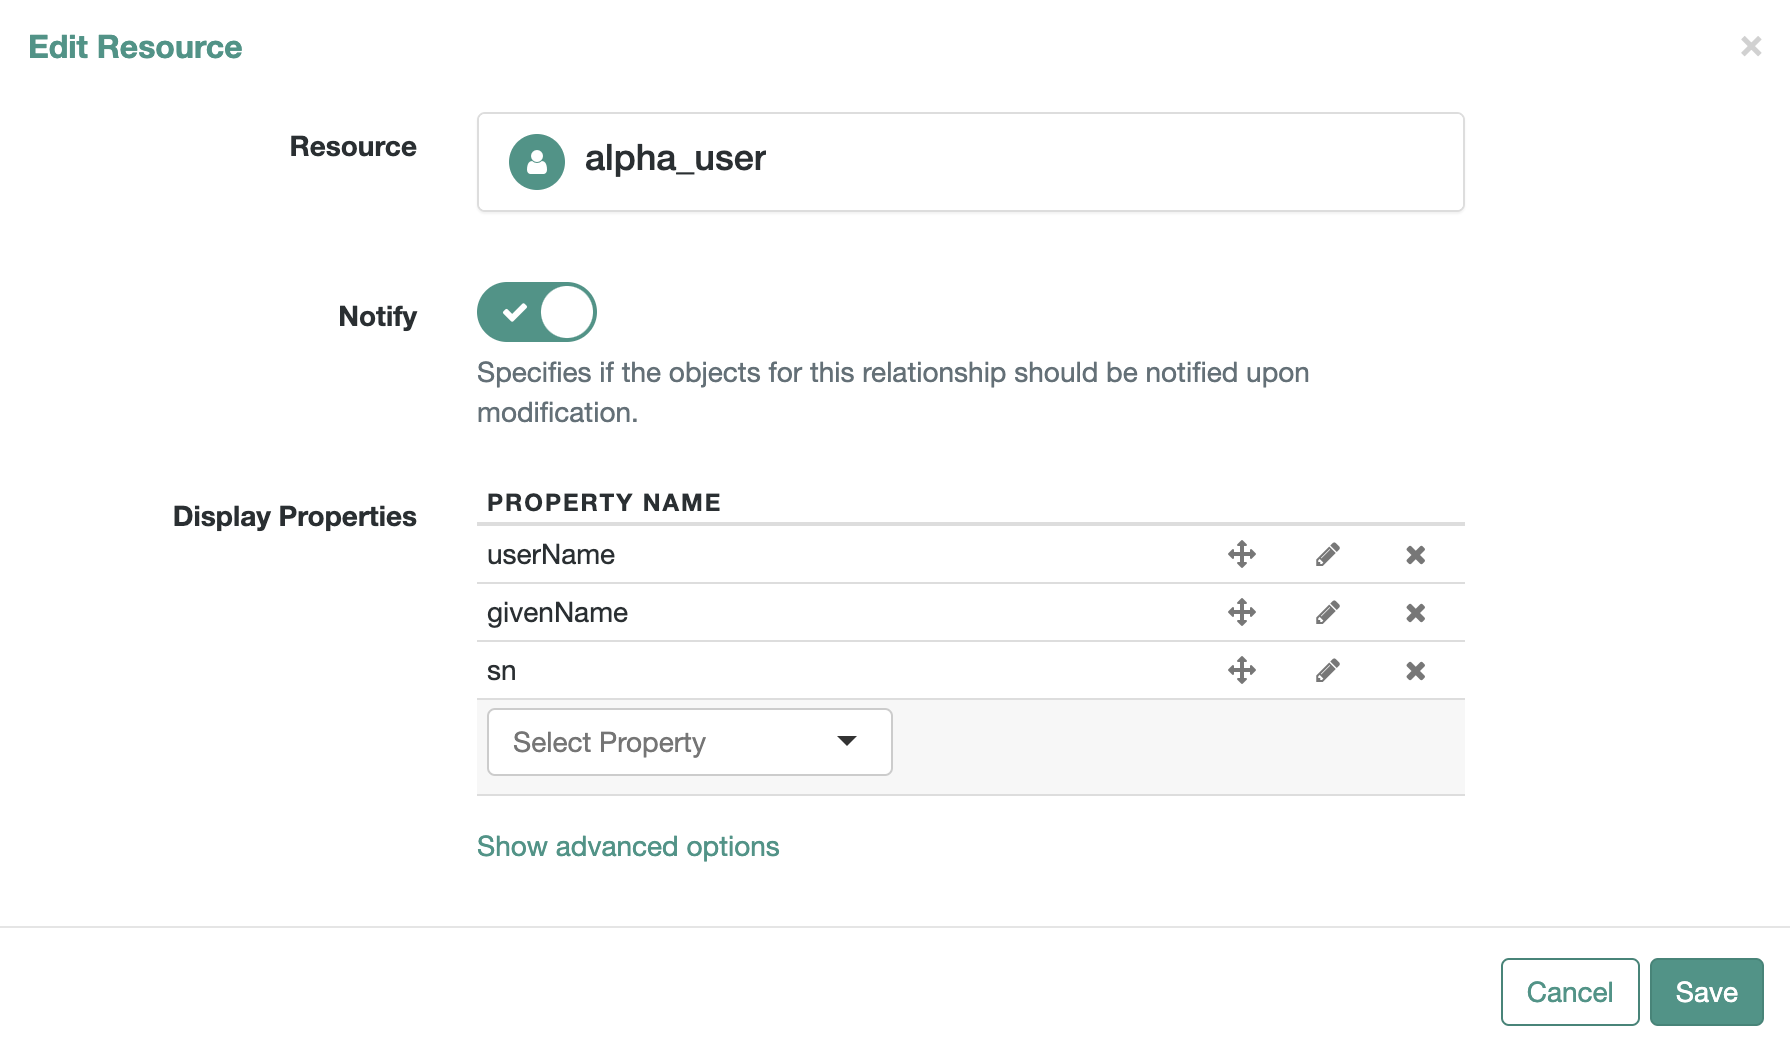 Reports property with Notify selected